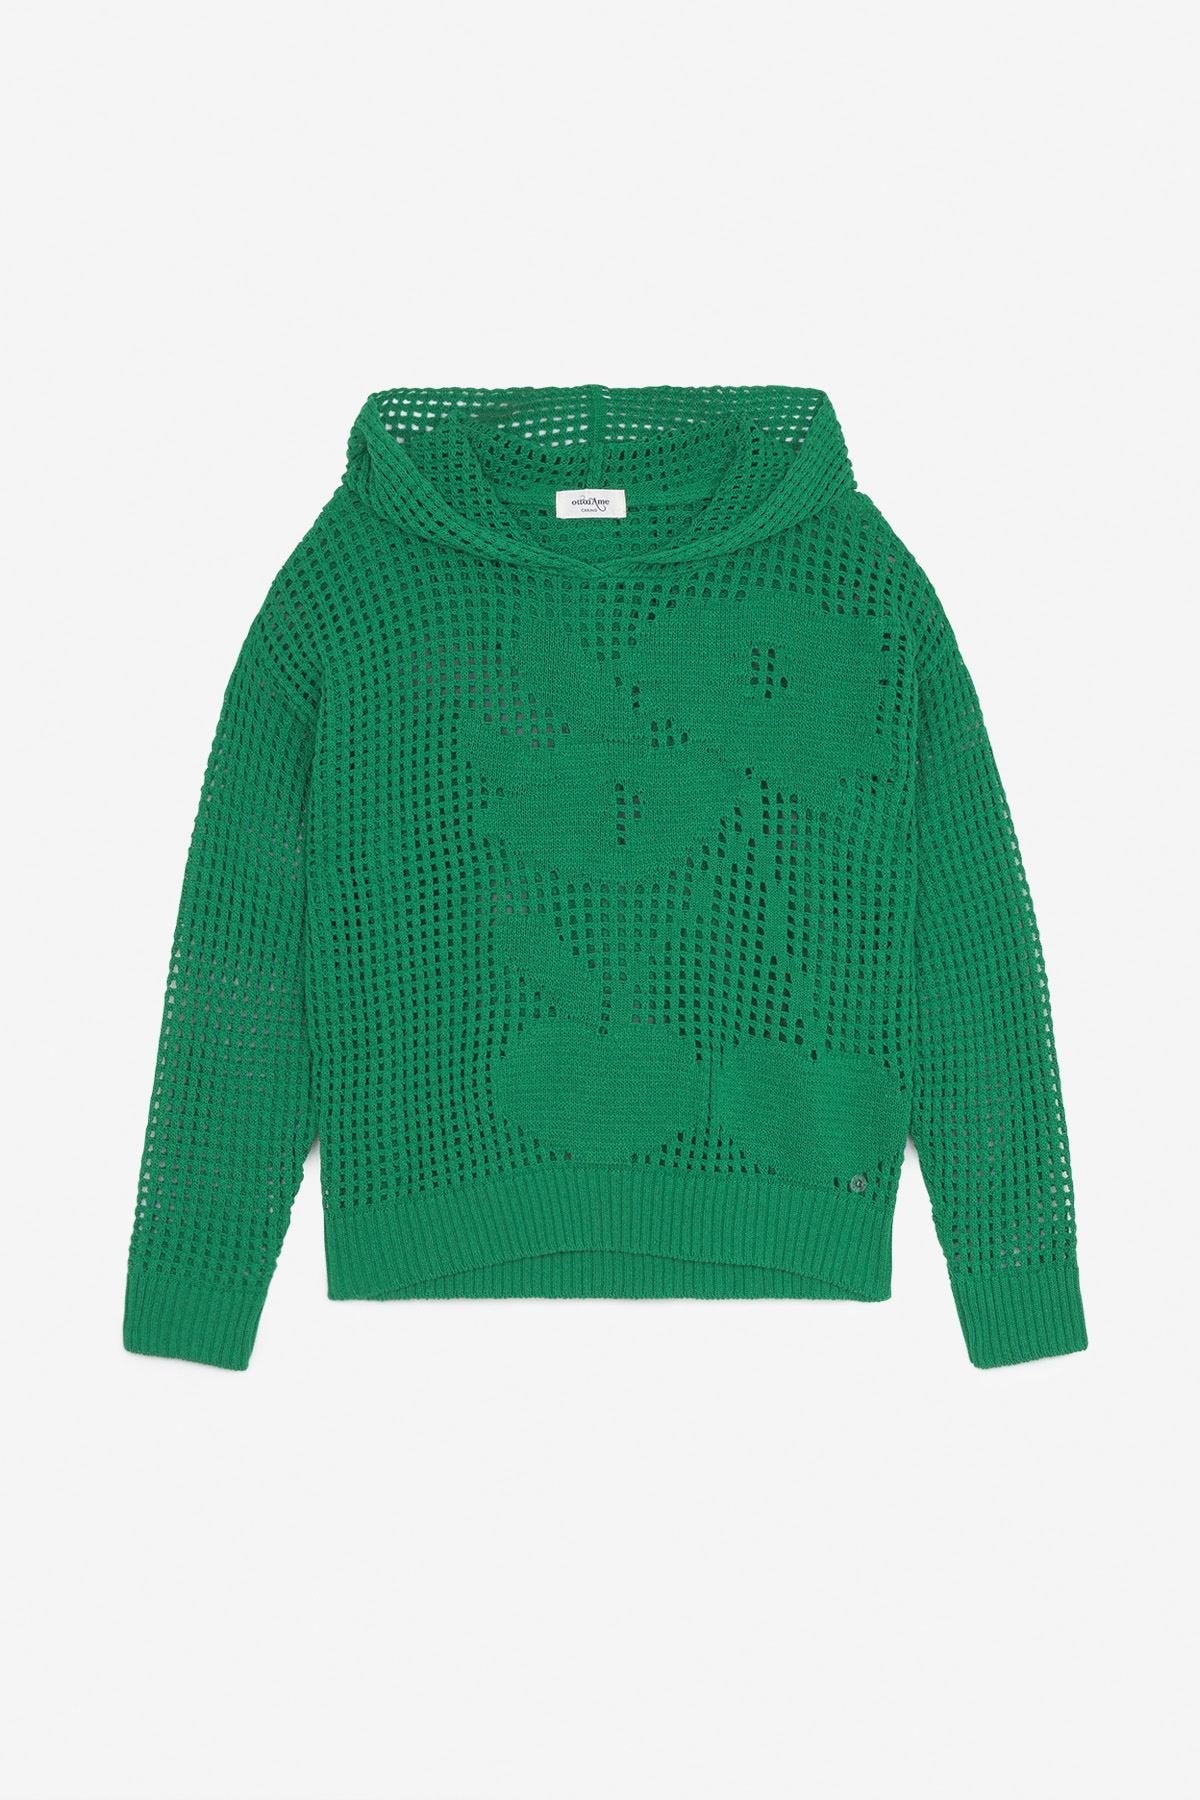 Ottod'ame- Crochet Cherry Hoodie: Forest Green